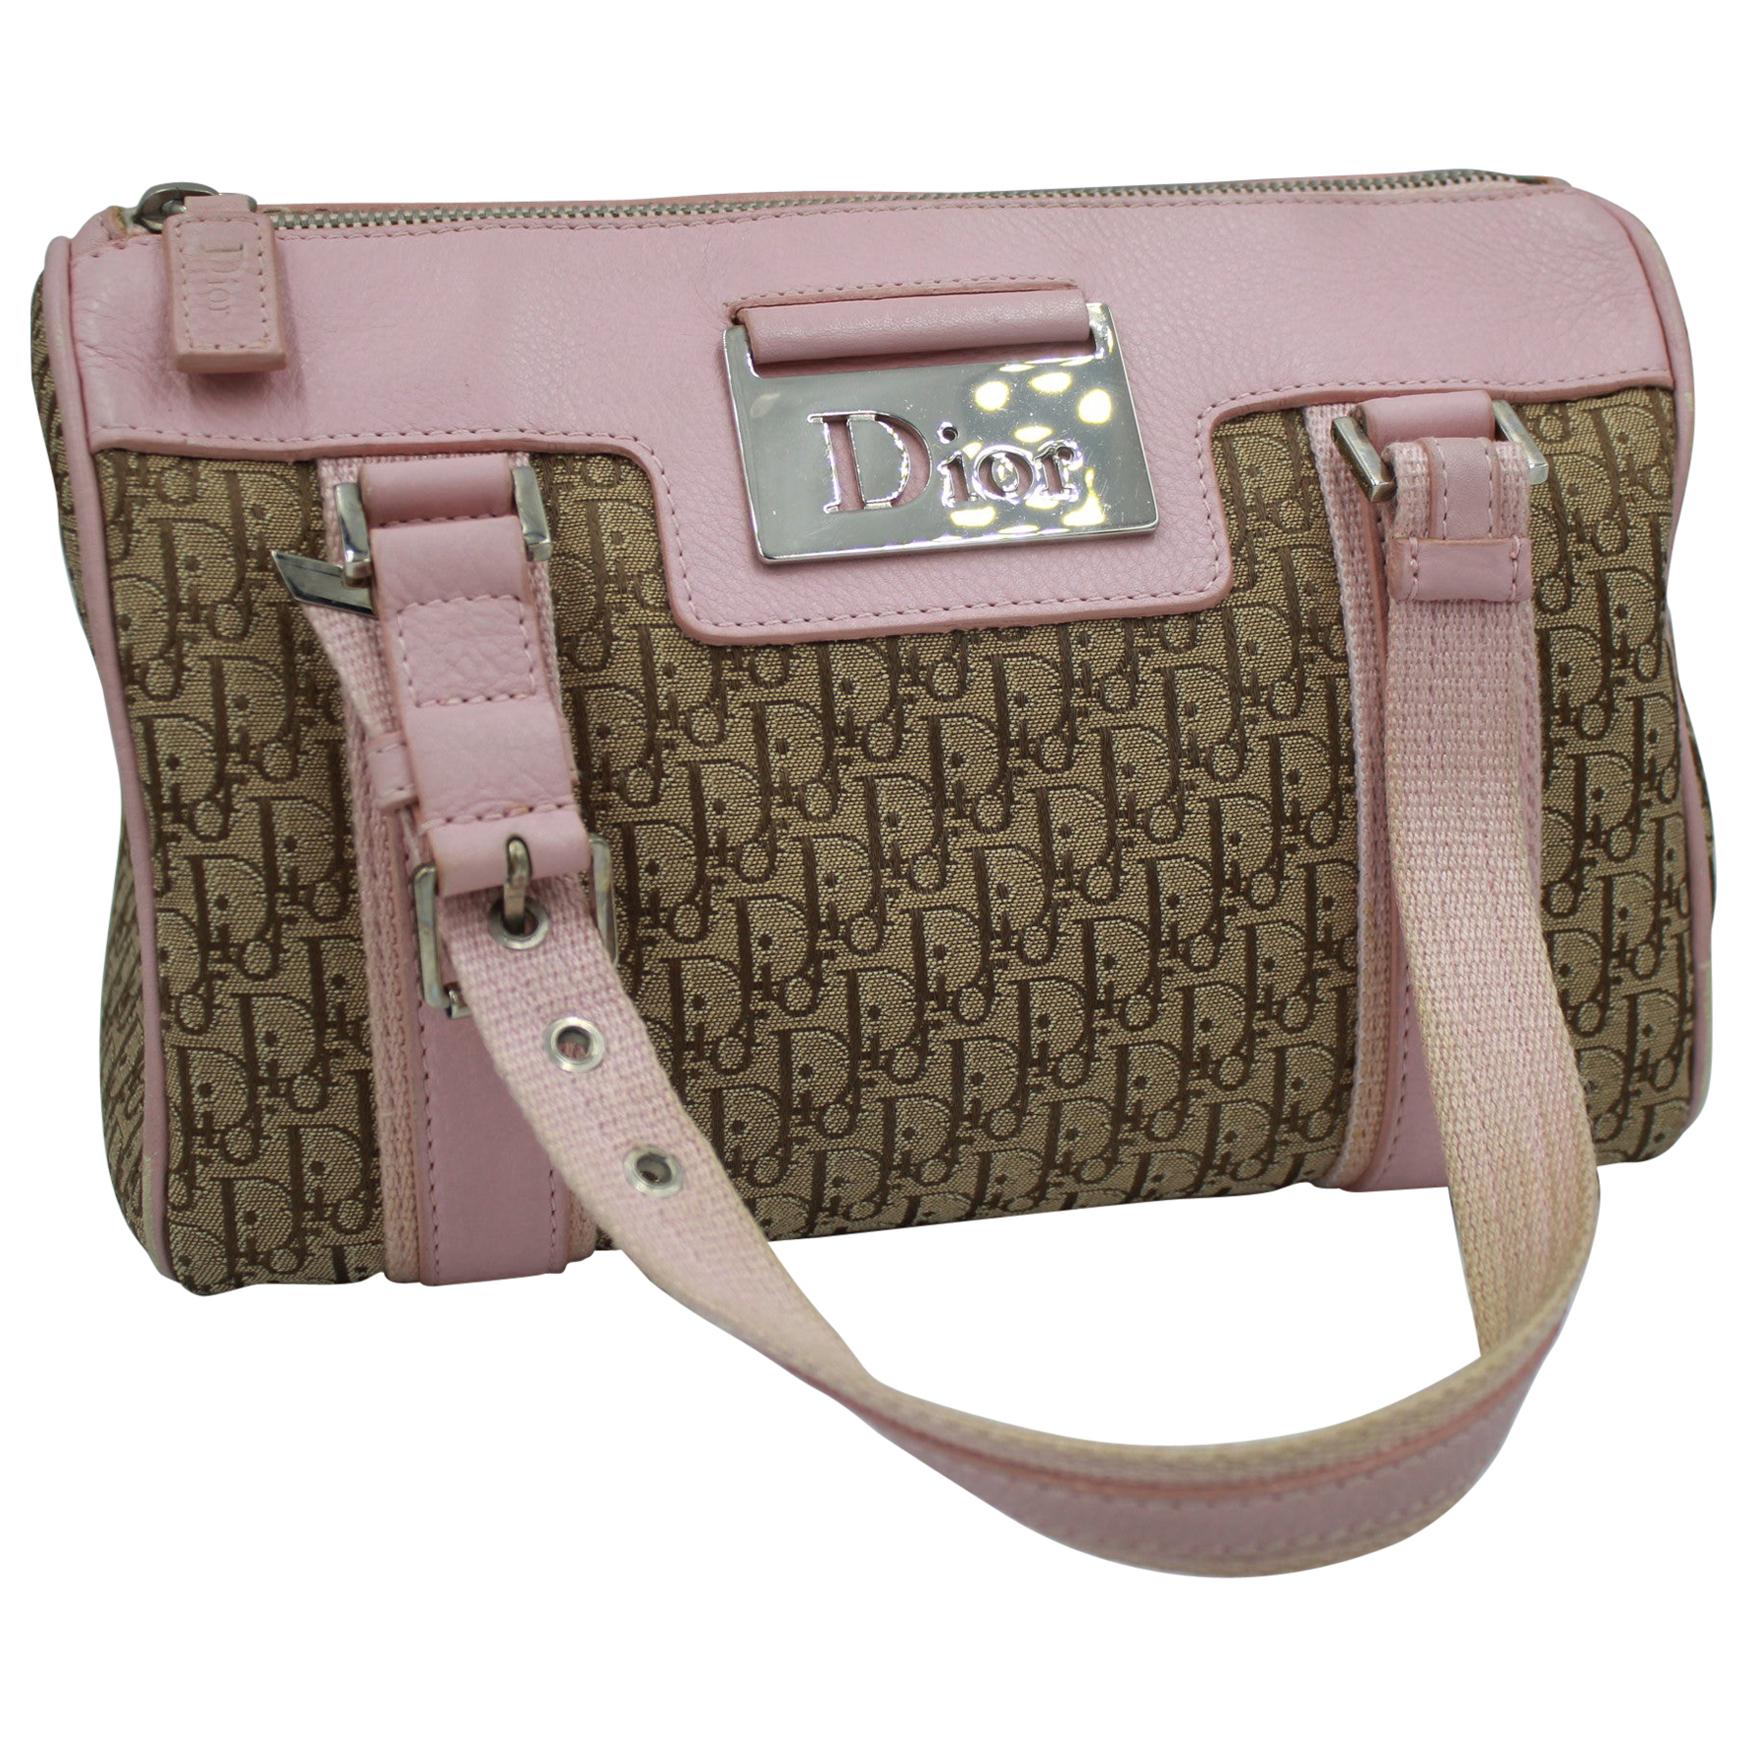 Dior boston handbag in monogram canvas and pink finishes For Sale